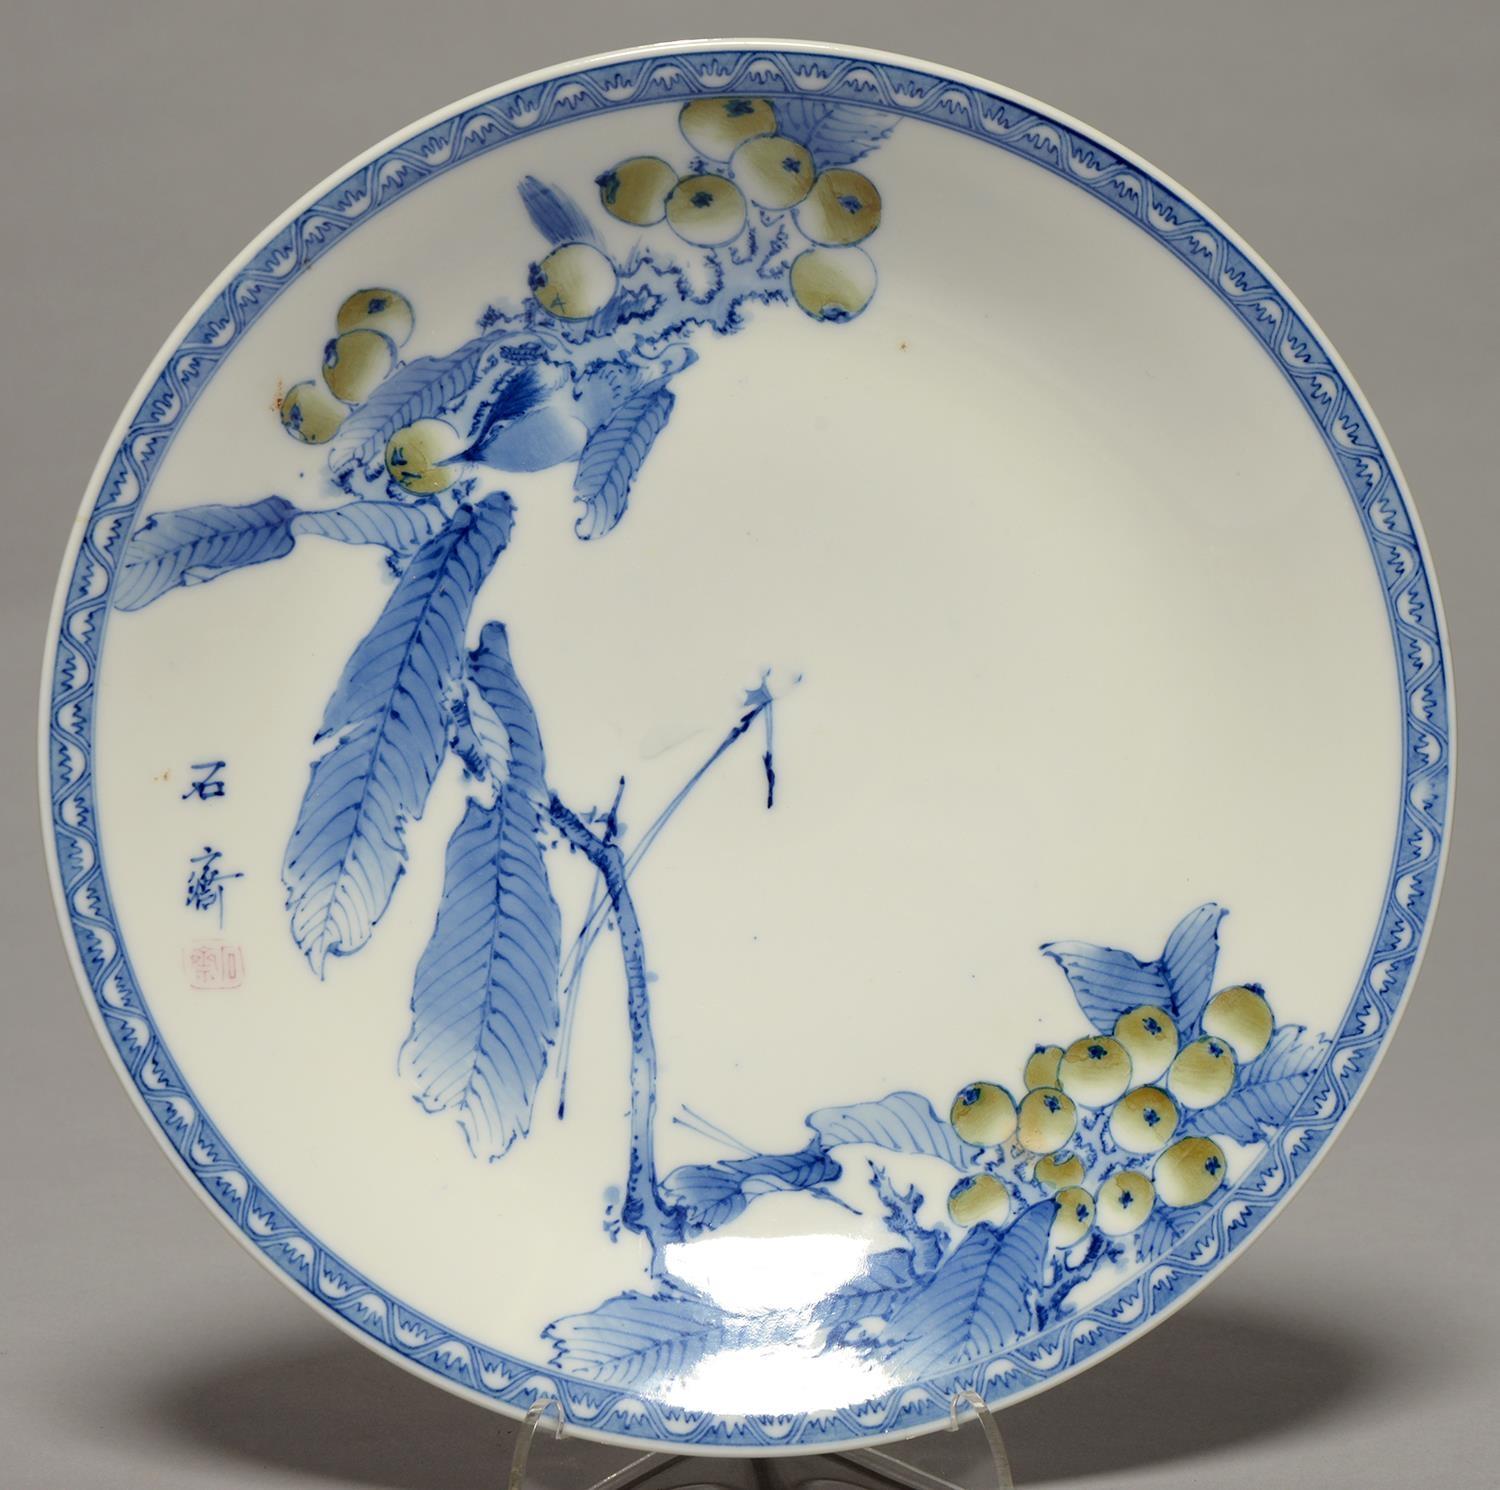 A JAPANESE BLUE AND WHITE DISH, FREELY PAINTED WITH GREEN BERRIES ON A BOUGH, 20TH C, 28CM DIAM,